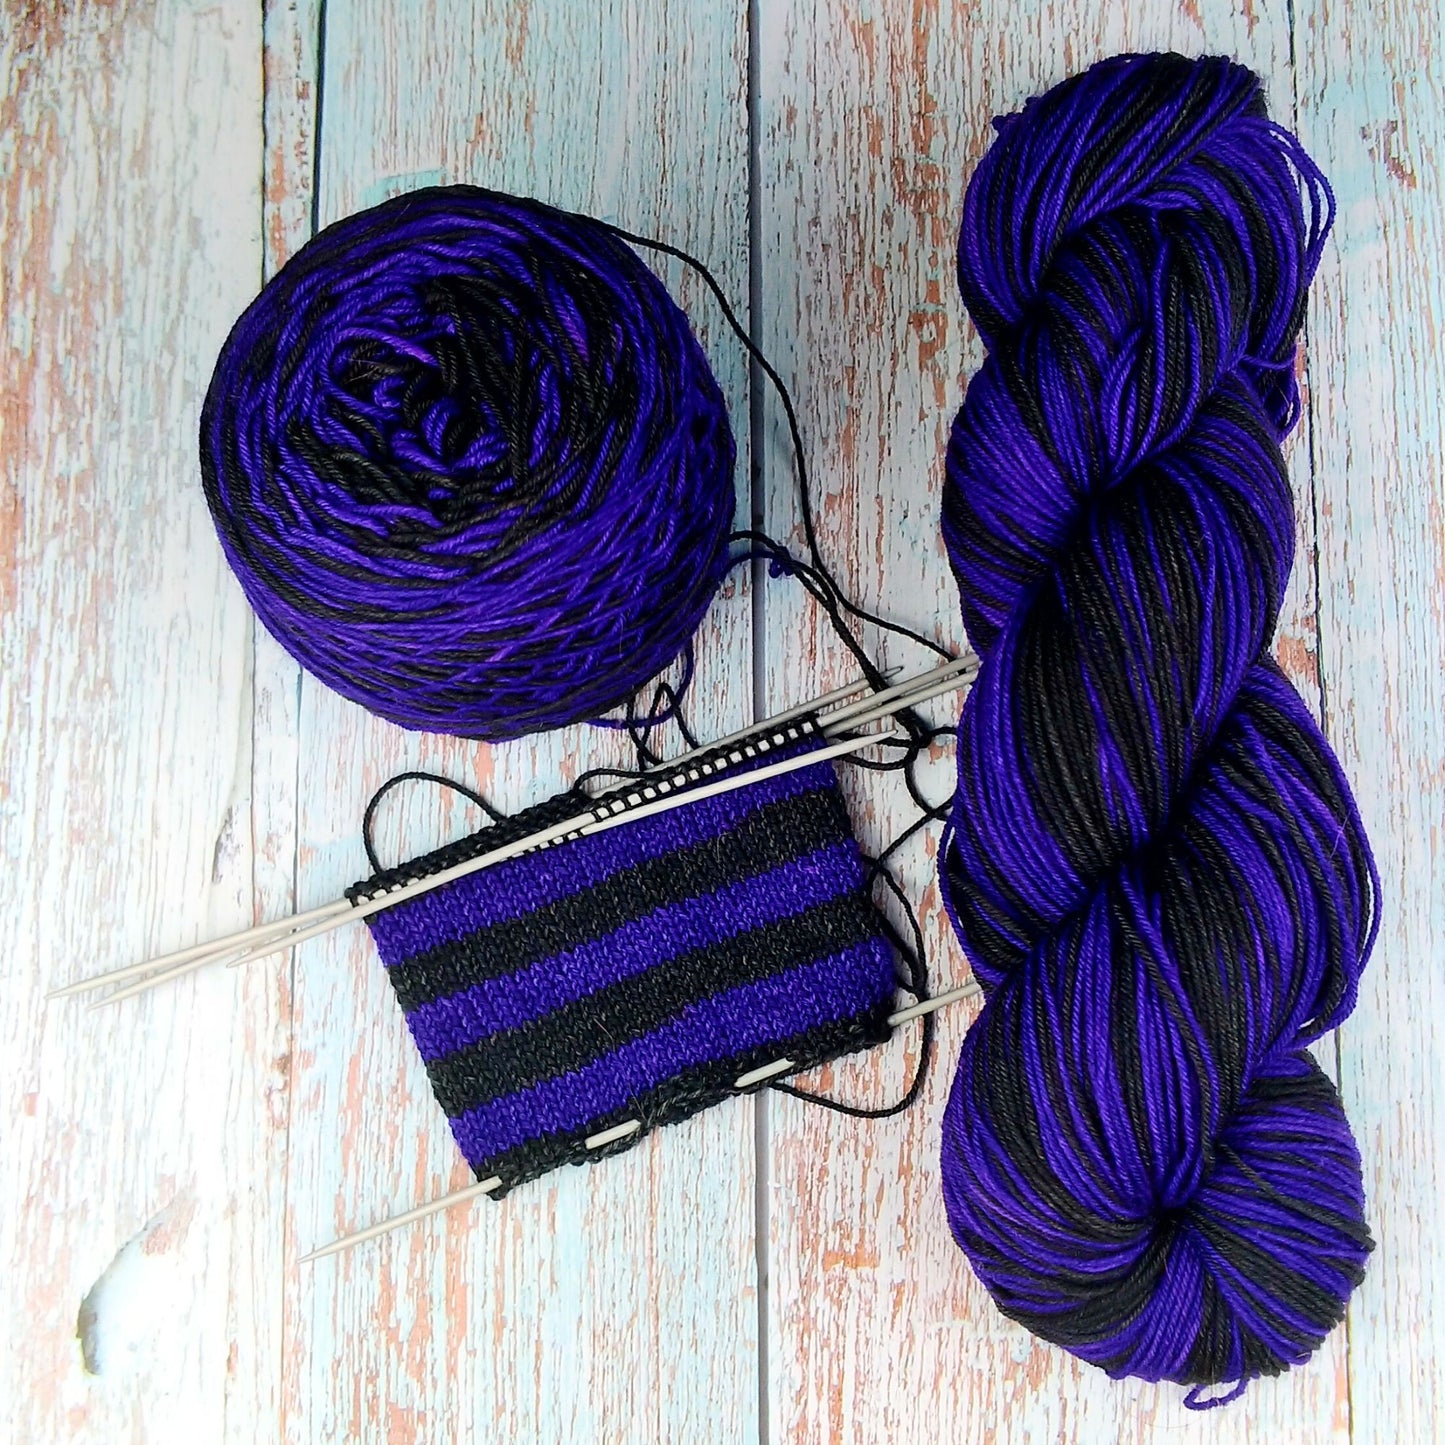 OR -  Chickadee Fingering/Sock - Ready to ship